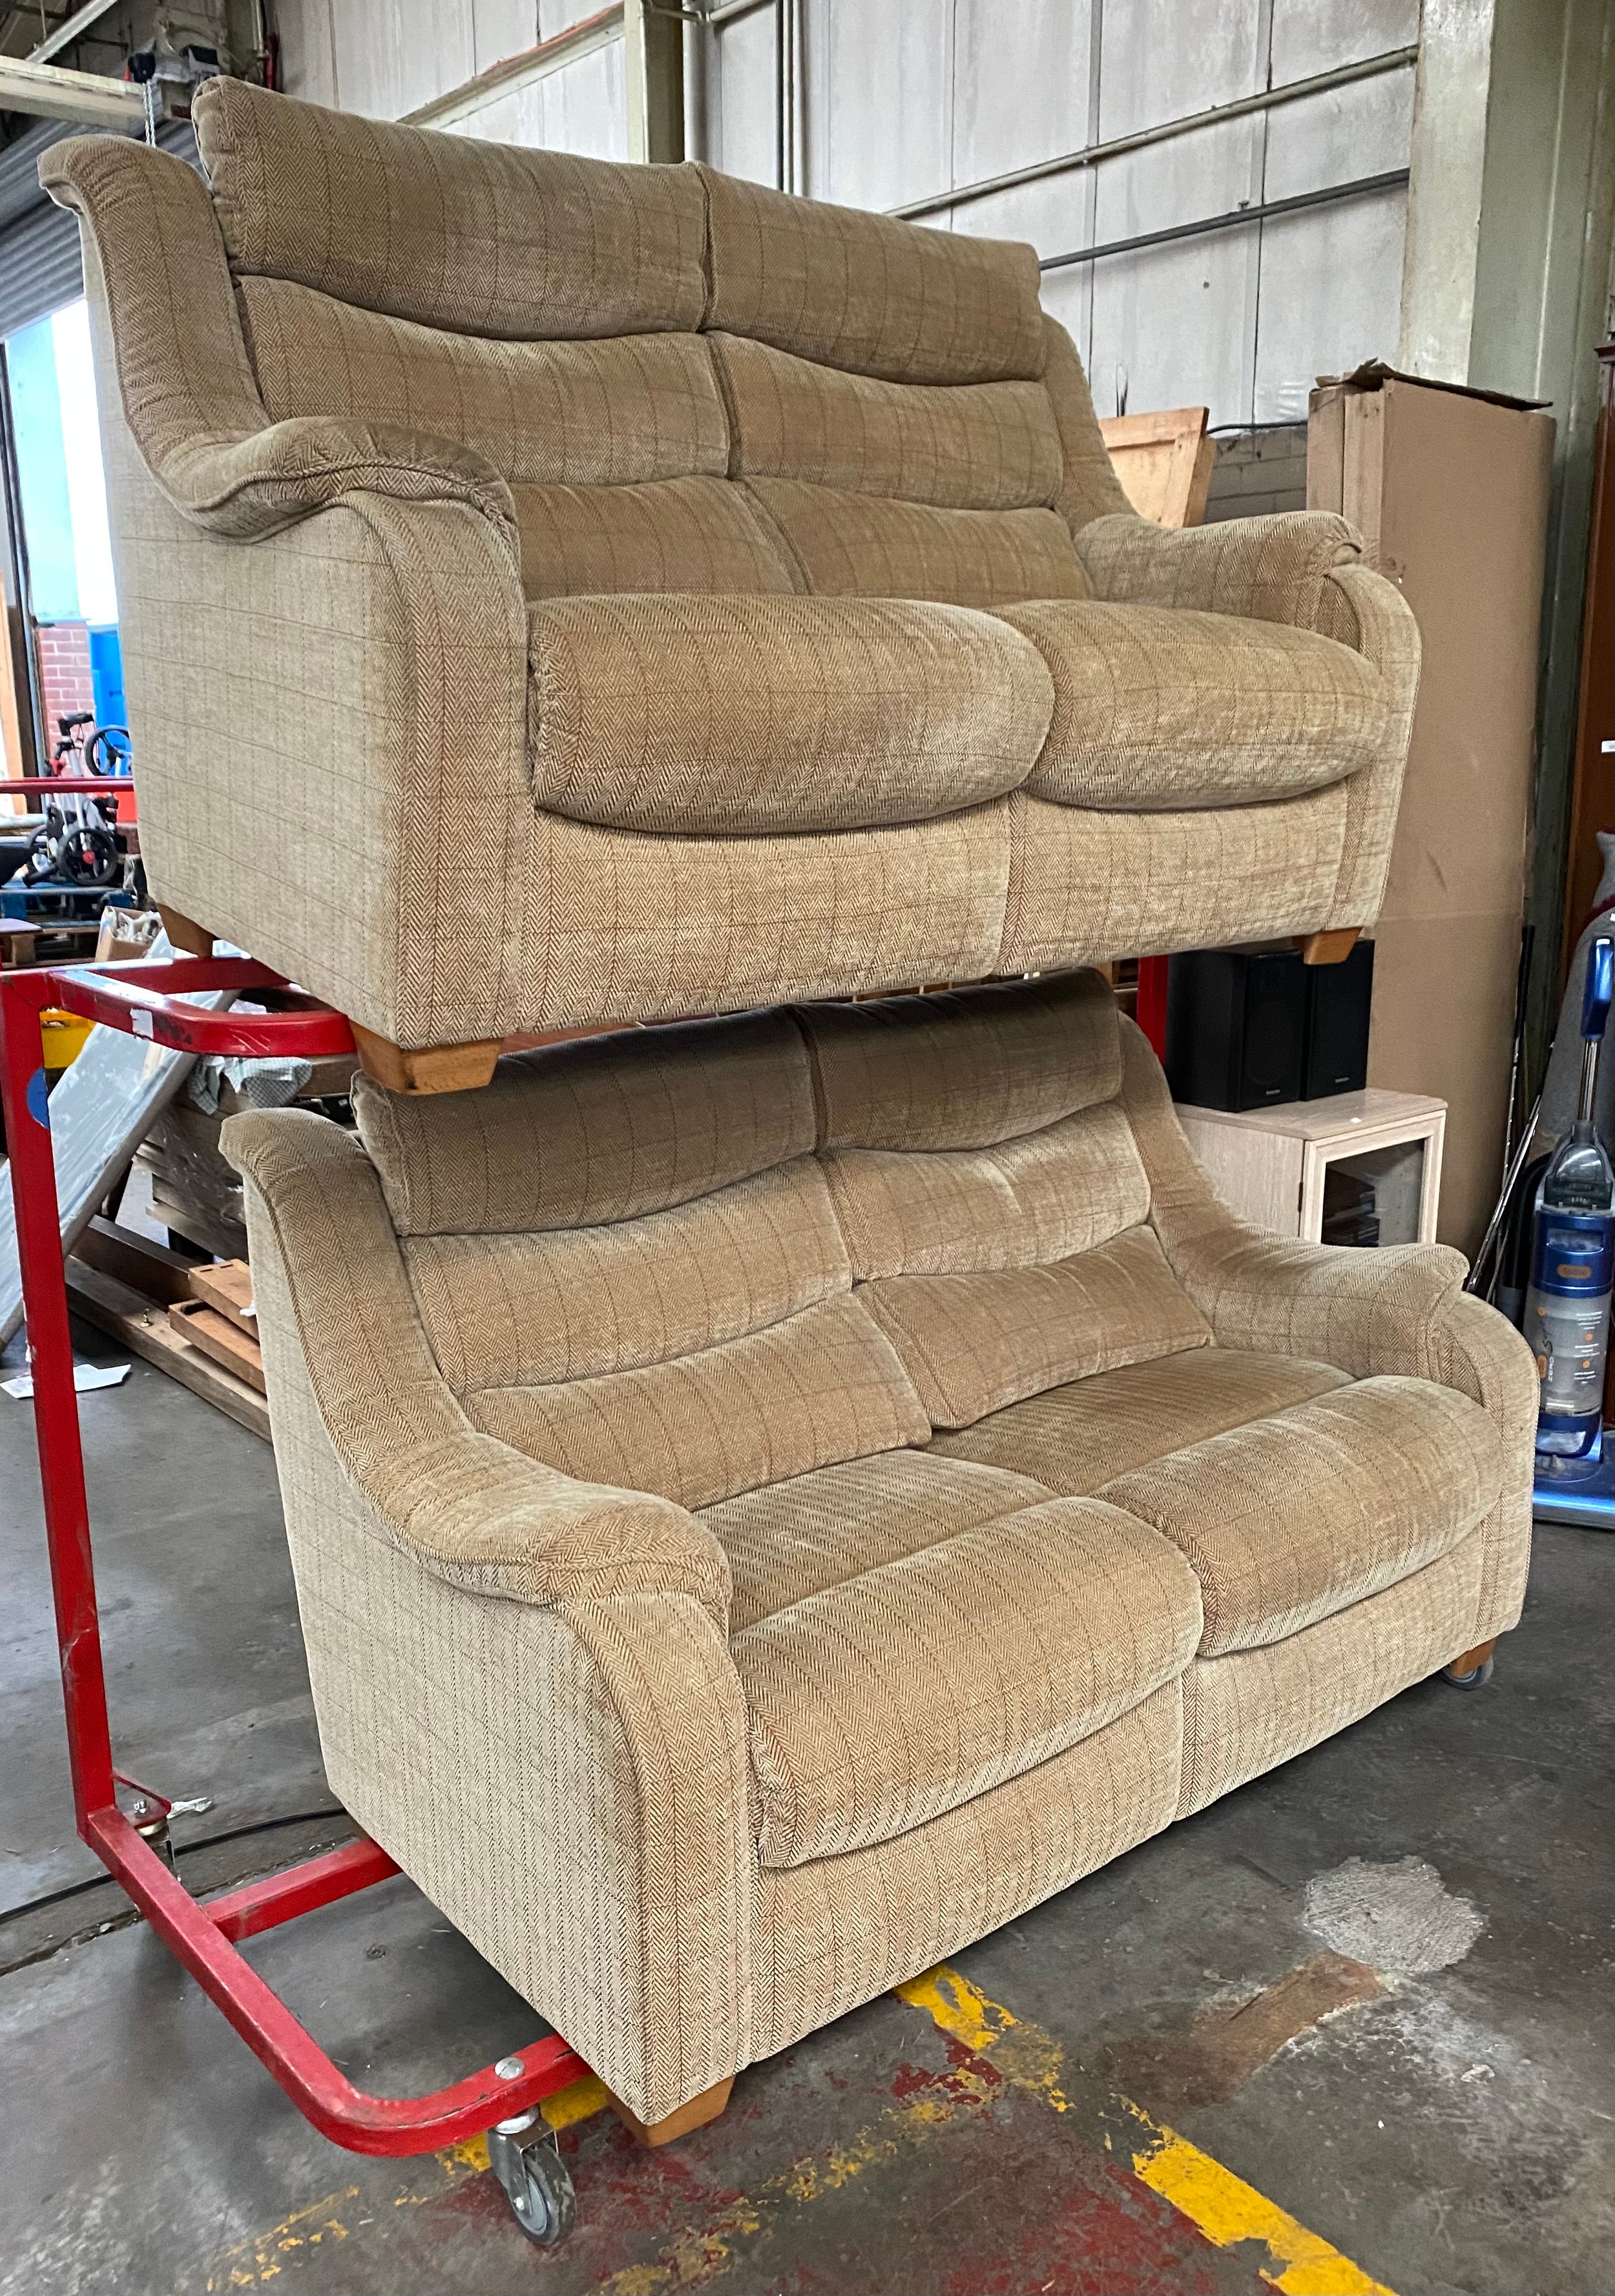 Parker knoll 2 x 2 seater sofas - Image 2 of 2